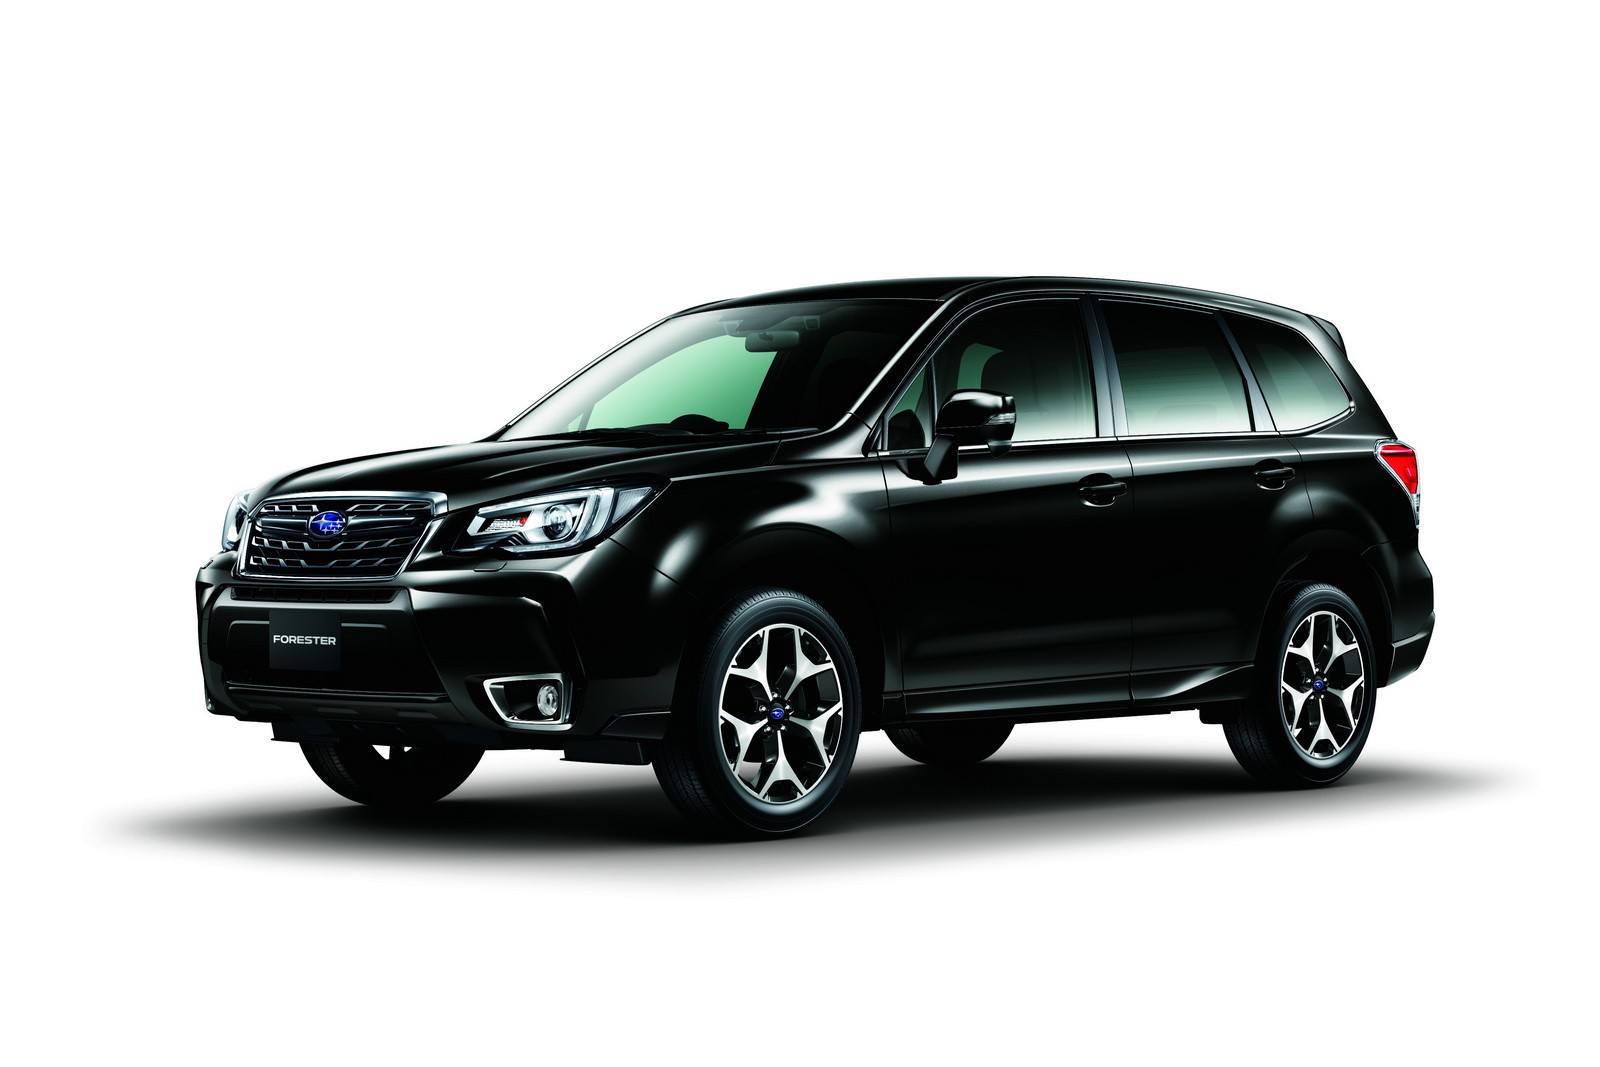 2017 subaru forester facelift revealed ahead of tokyo motor show debut_14